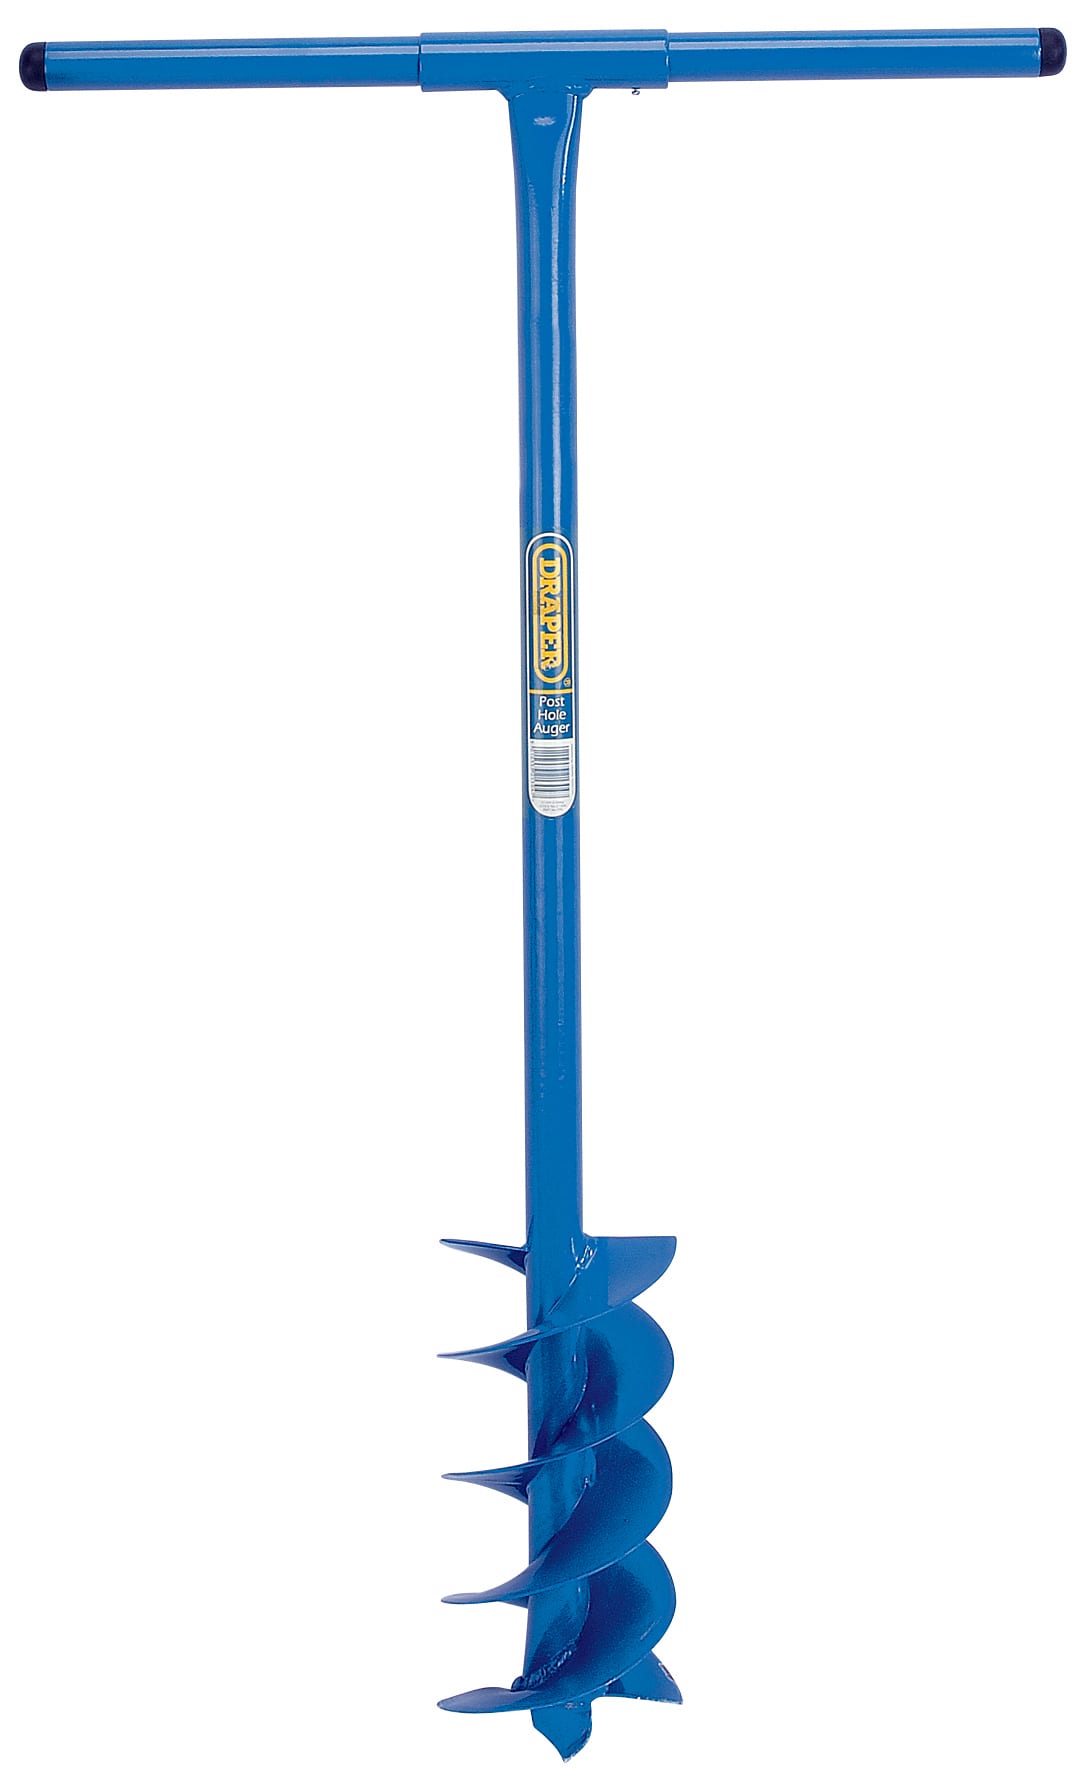 Draper FPA4 Fence Post Hole Auger - 950